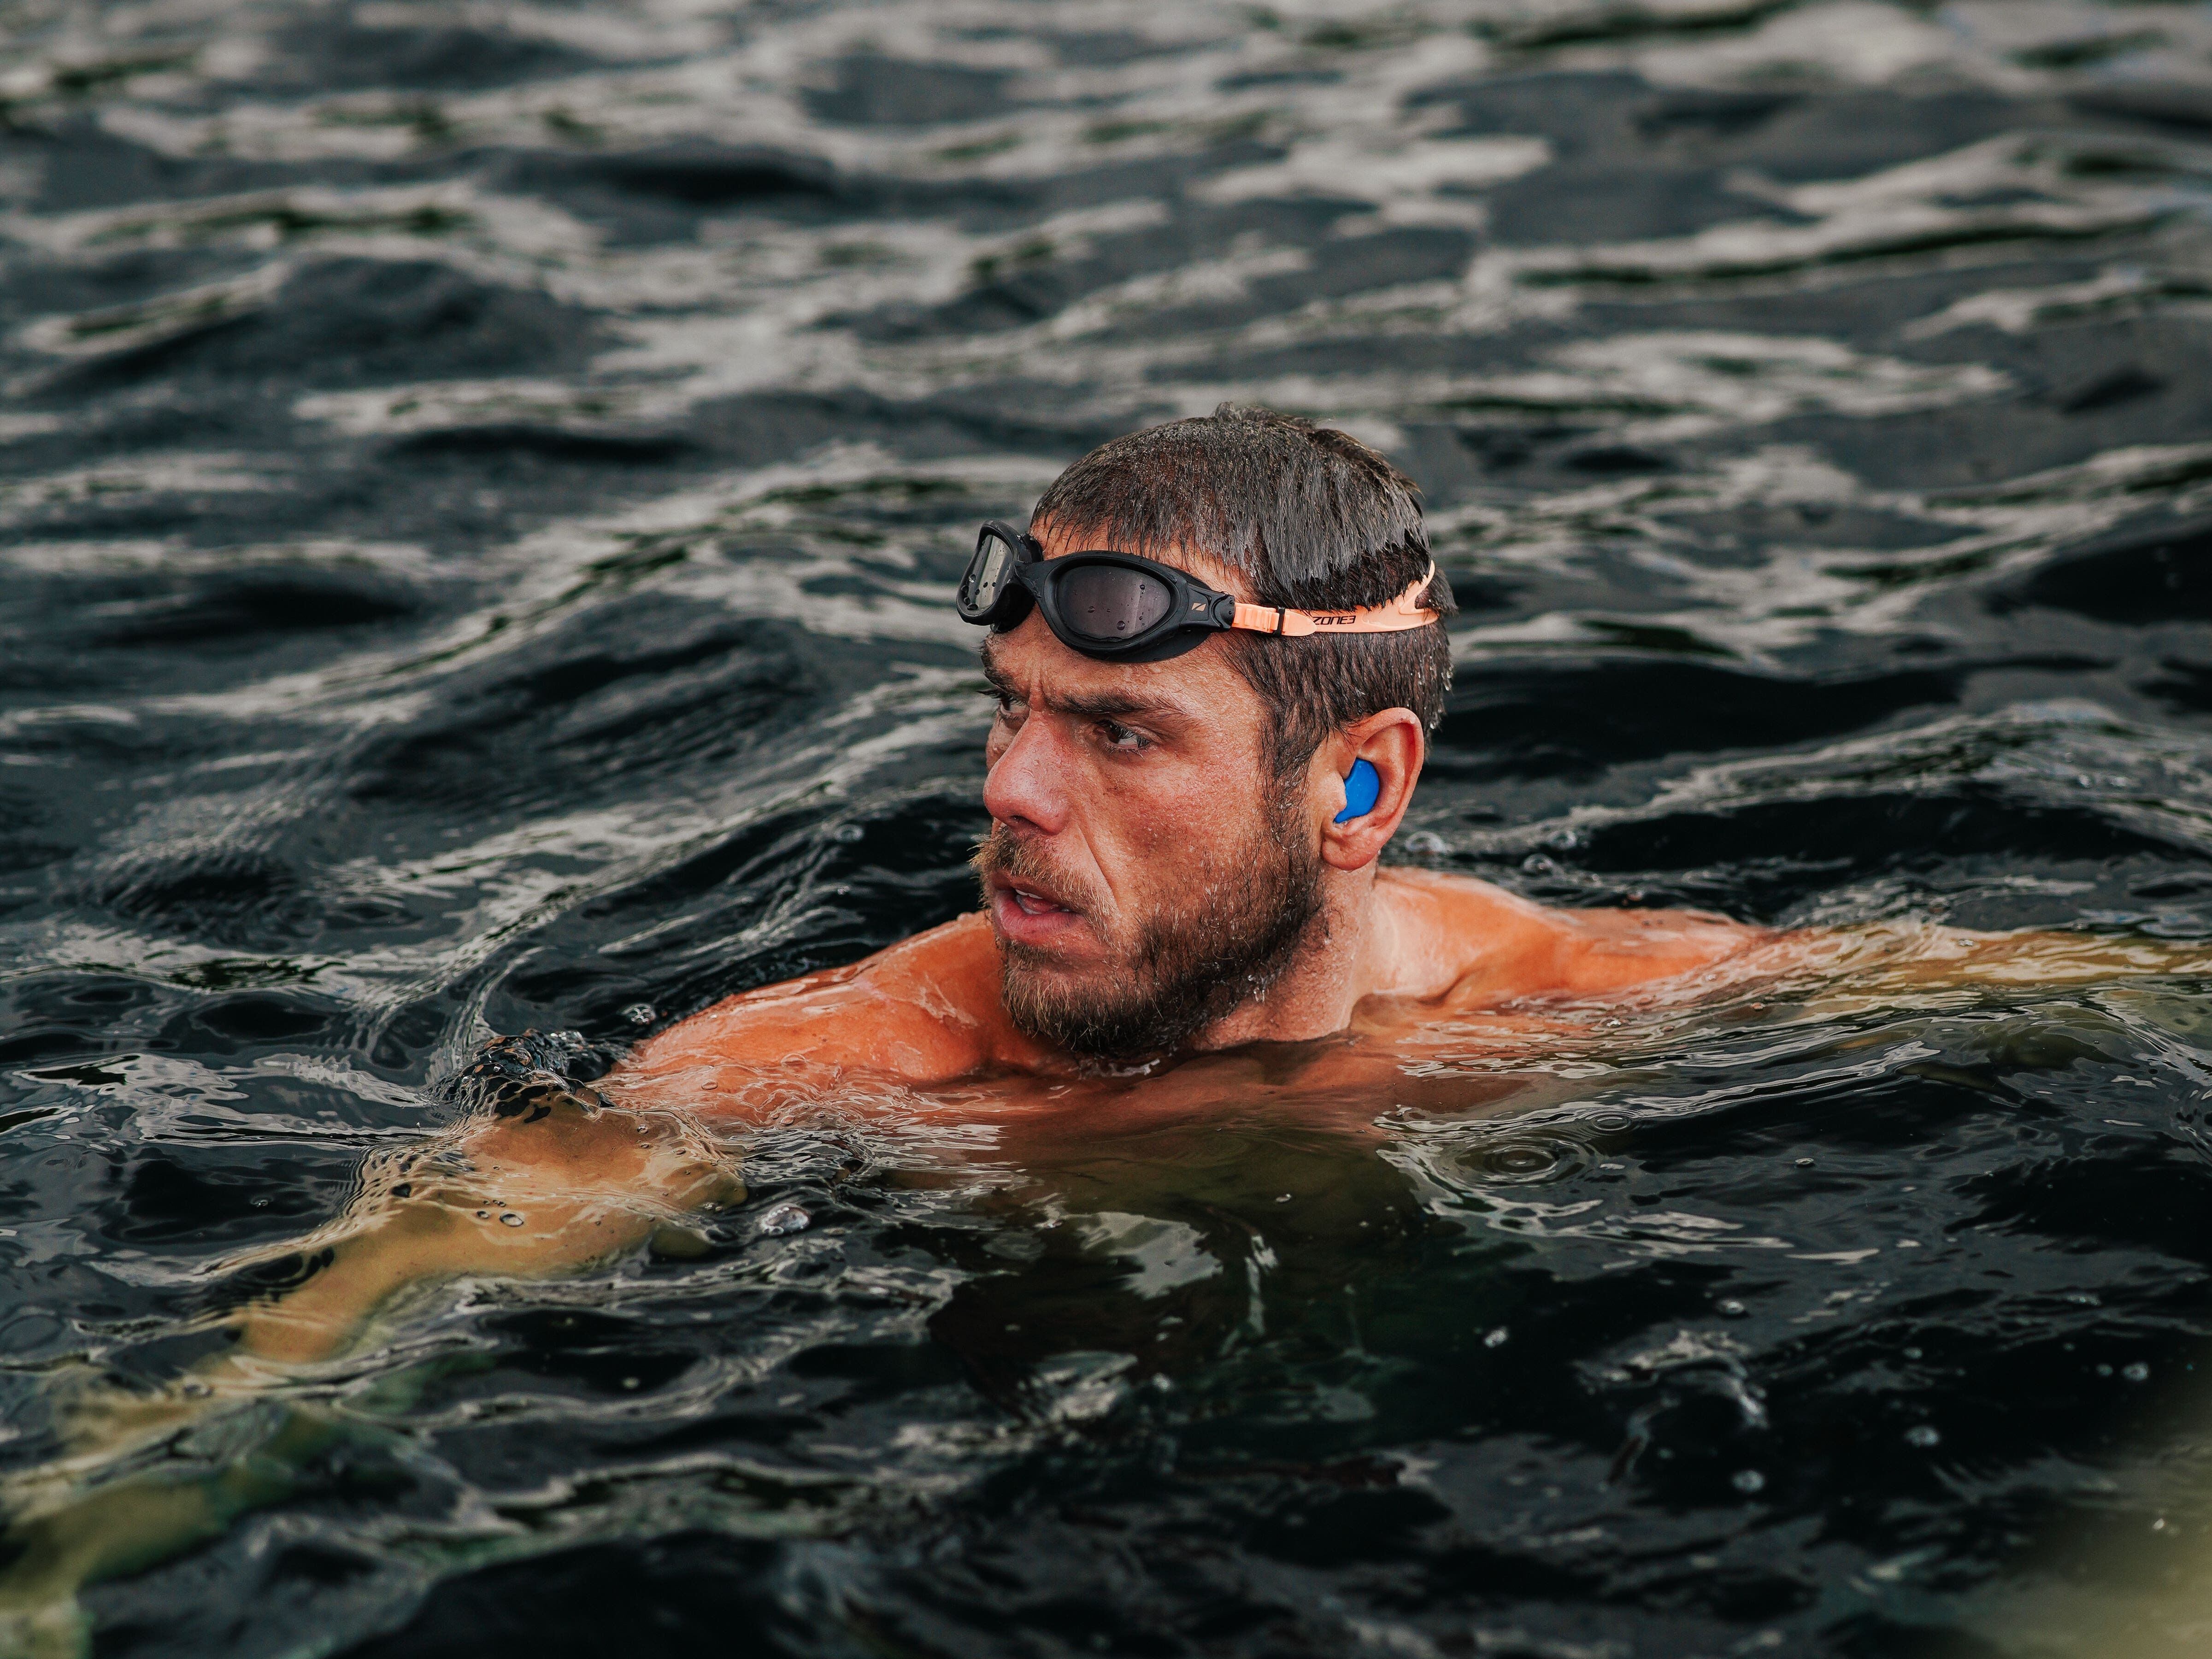 Ultra-swimmer aims to break record for longest distance swum in a pool in a week